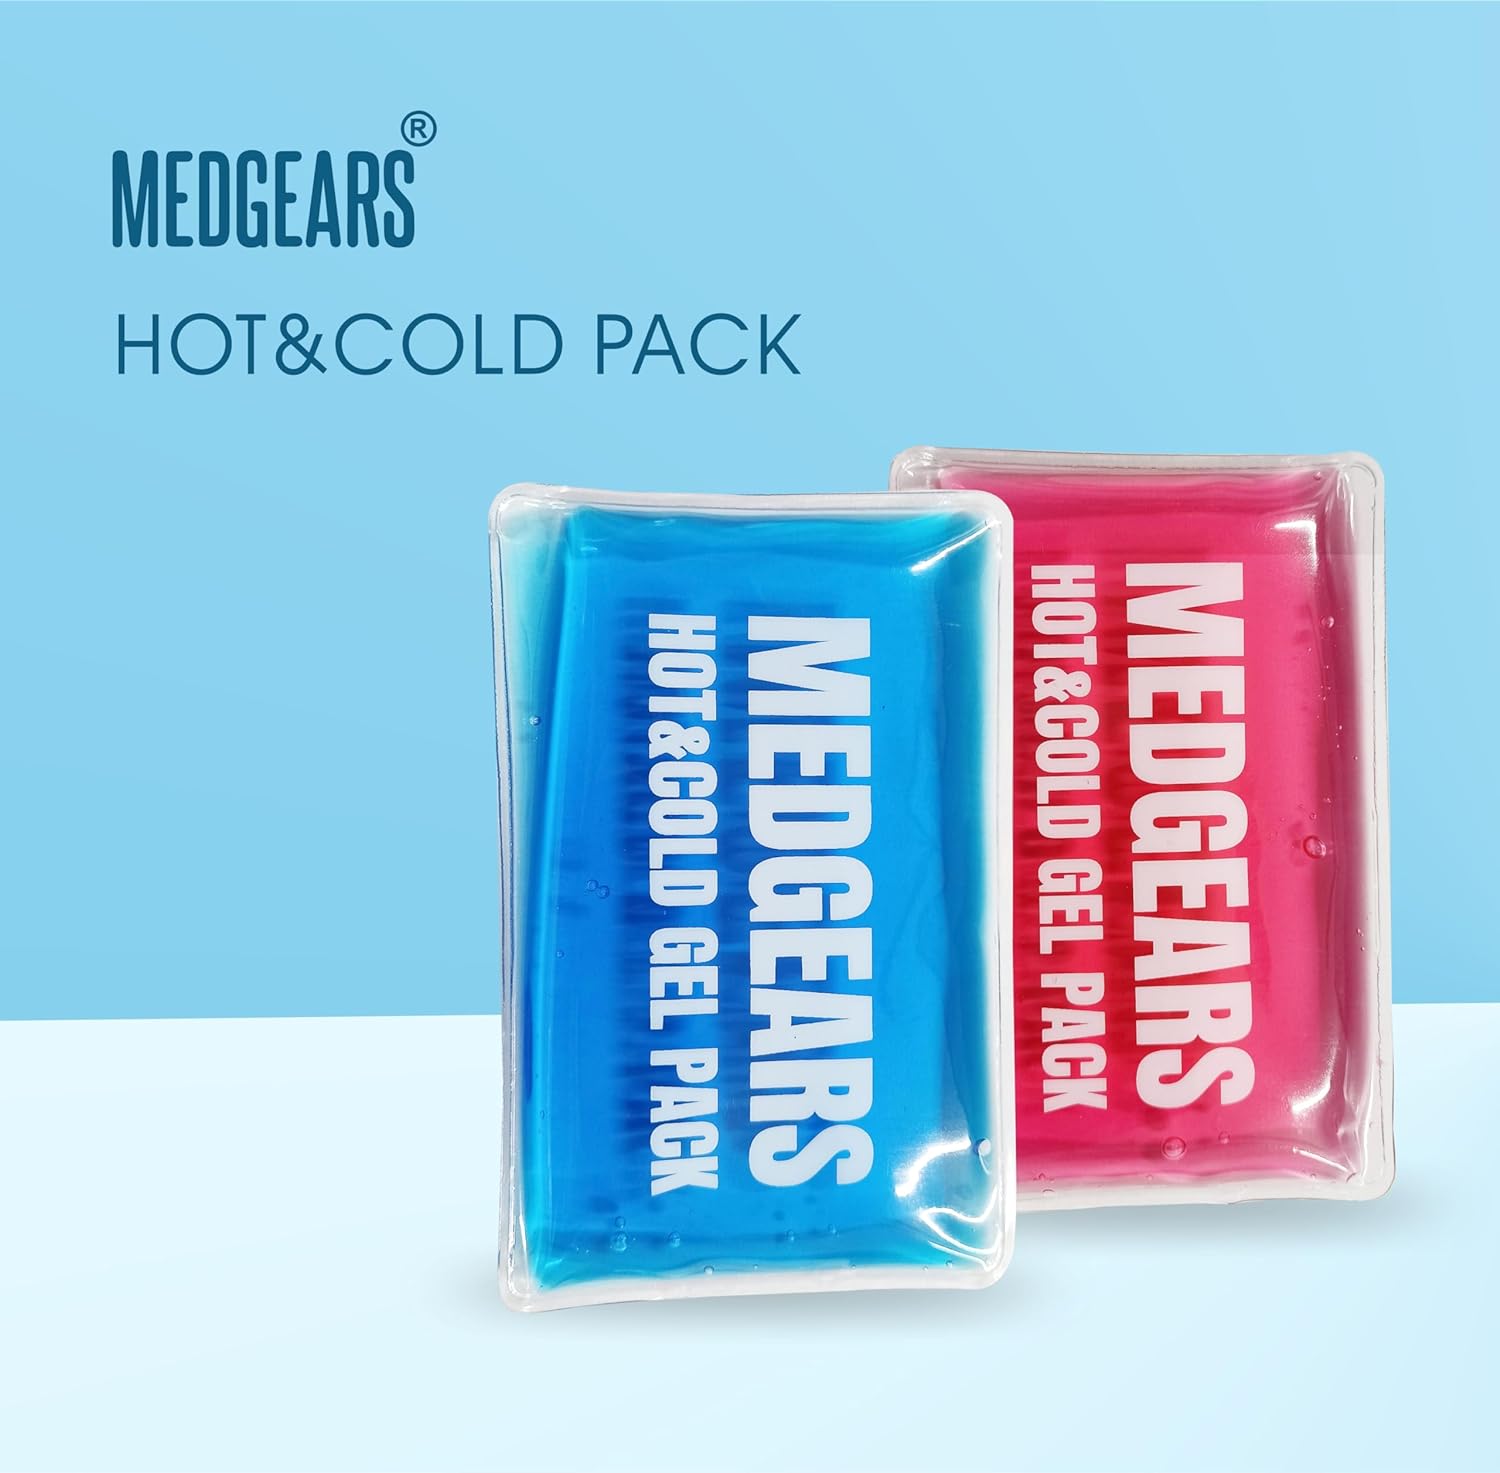  Hot & Cold Pack